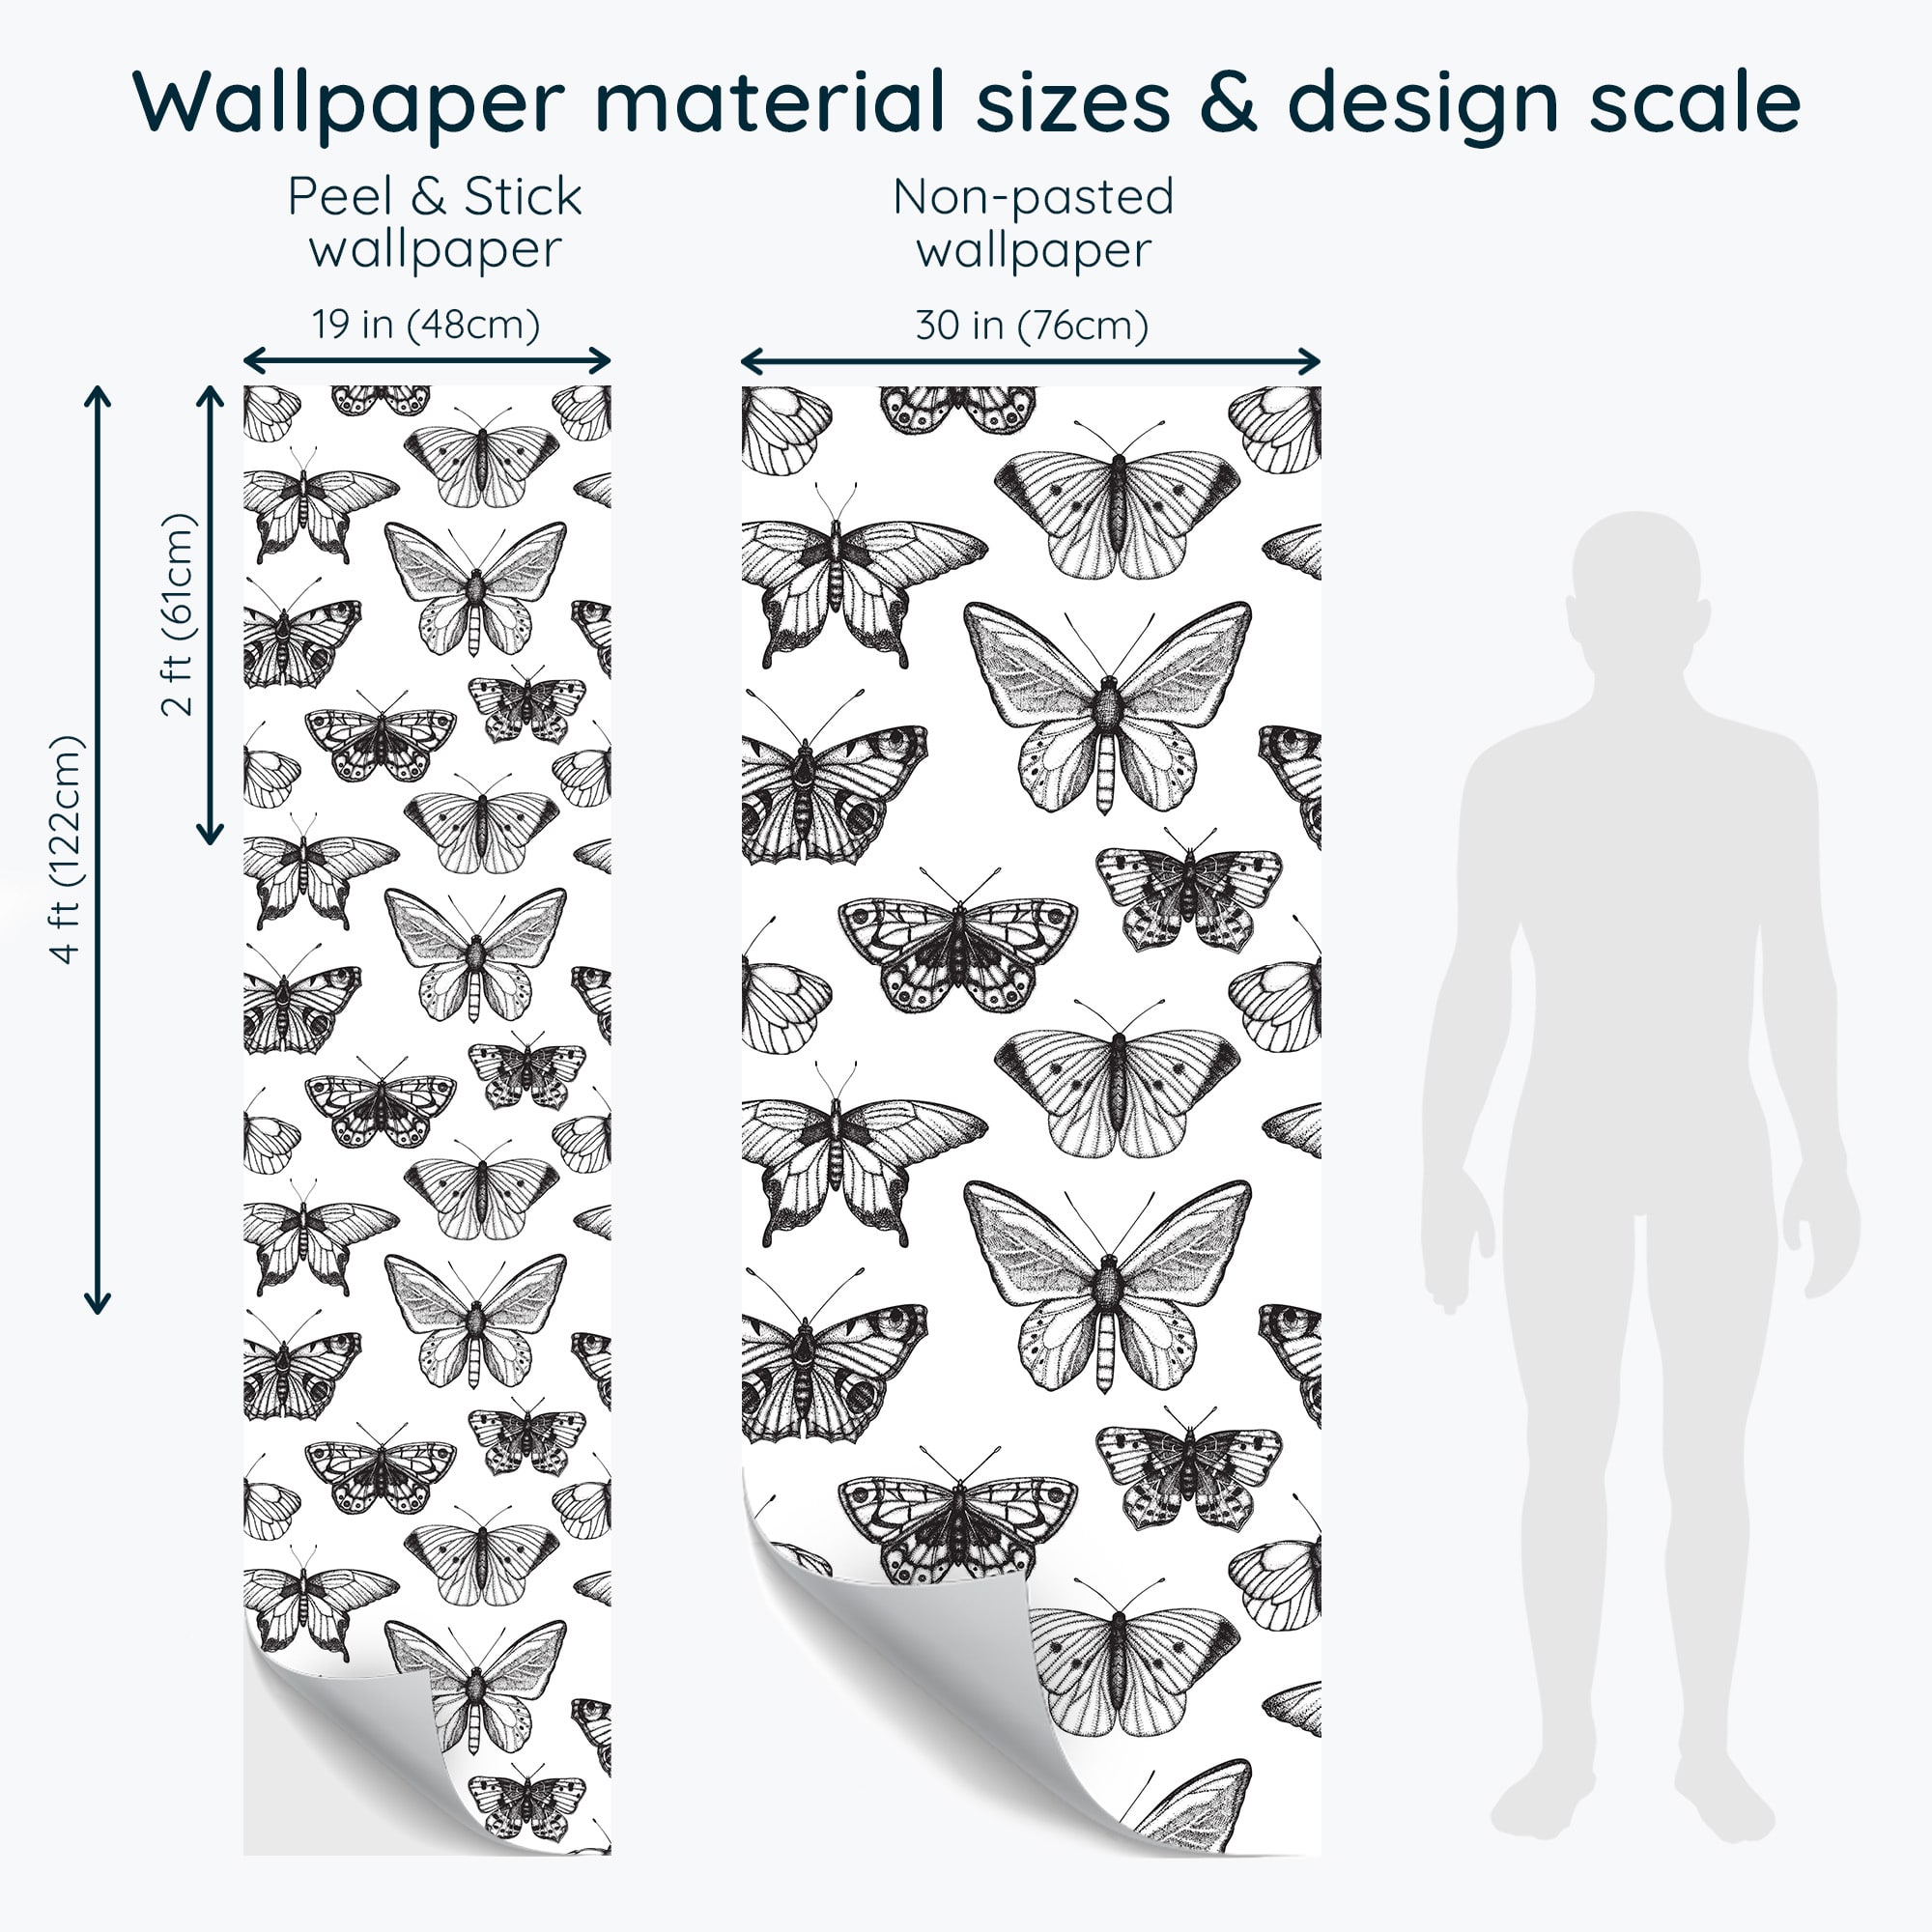 Non-pasted and Peel and stick Black and white butterfly design and pattern preview